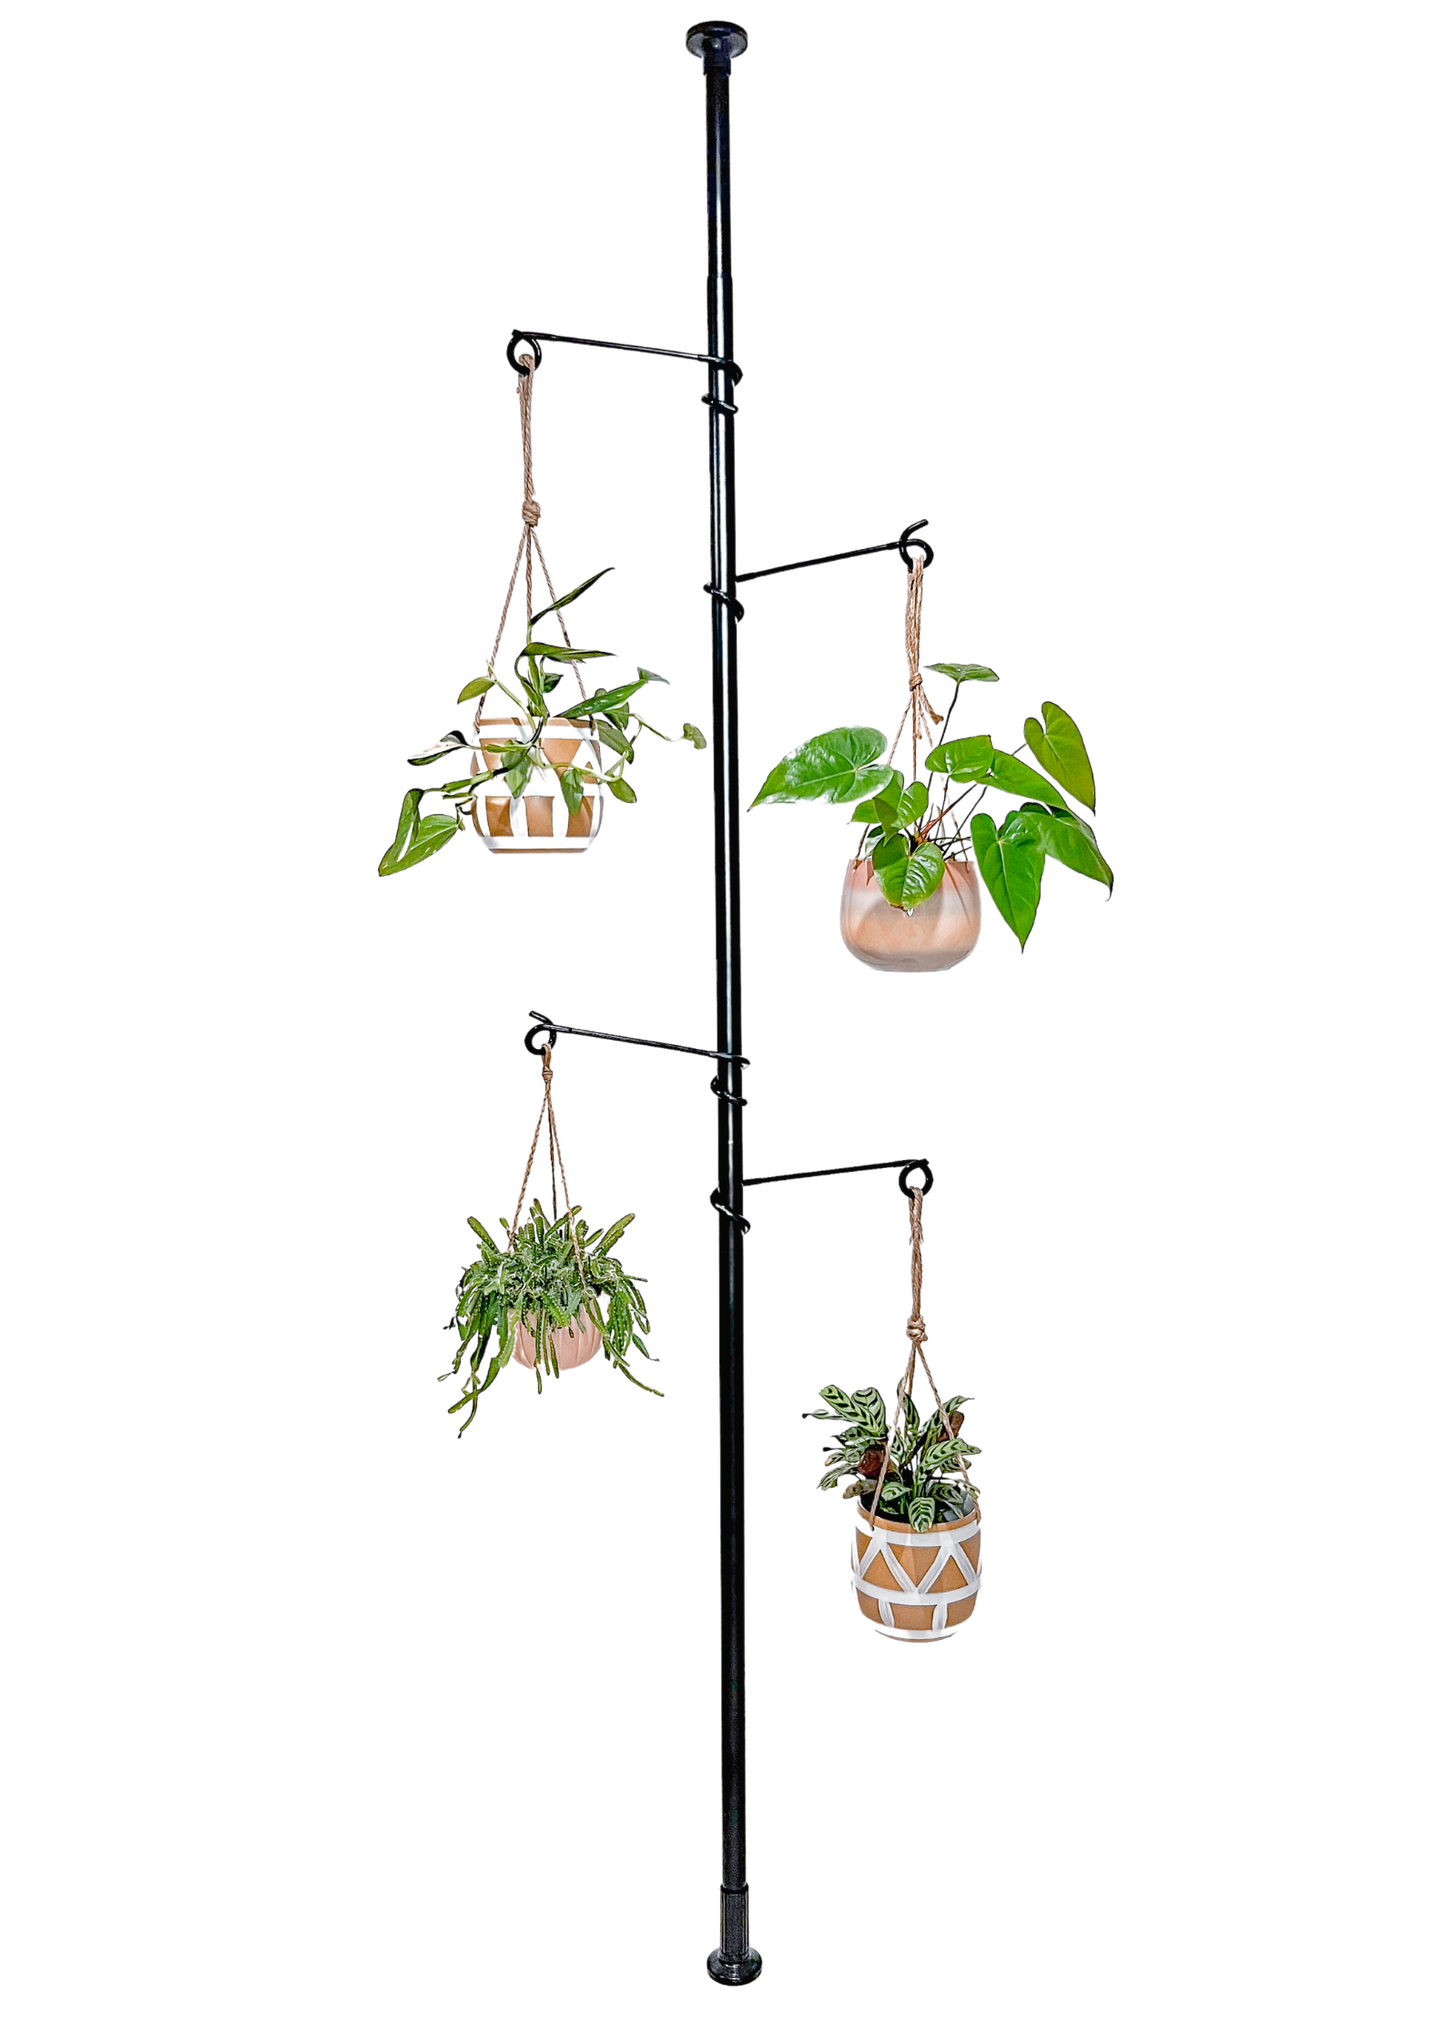 PREORDER - Tension Plant Hanging Pole By The Urban Jungle  - Black